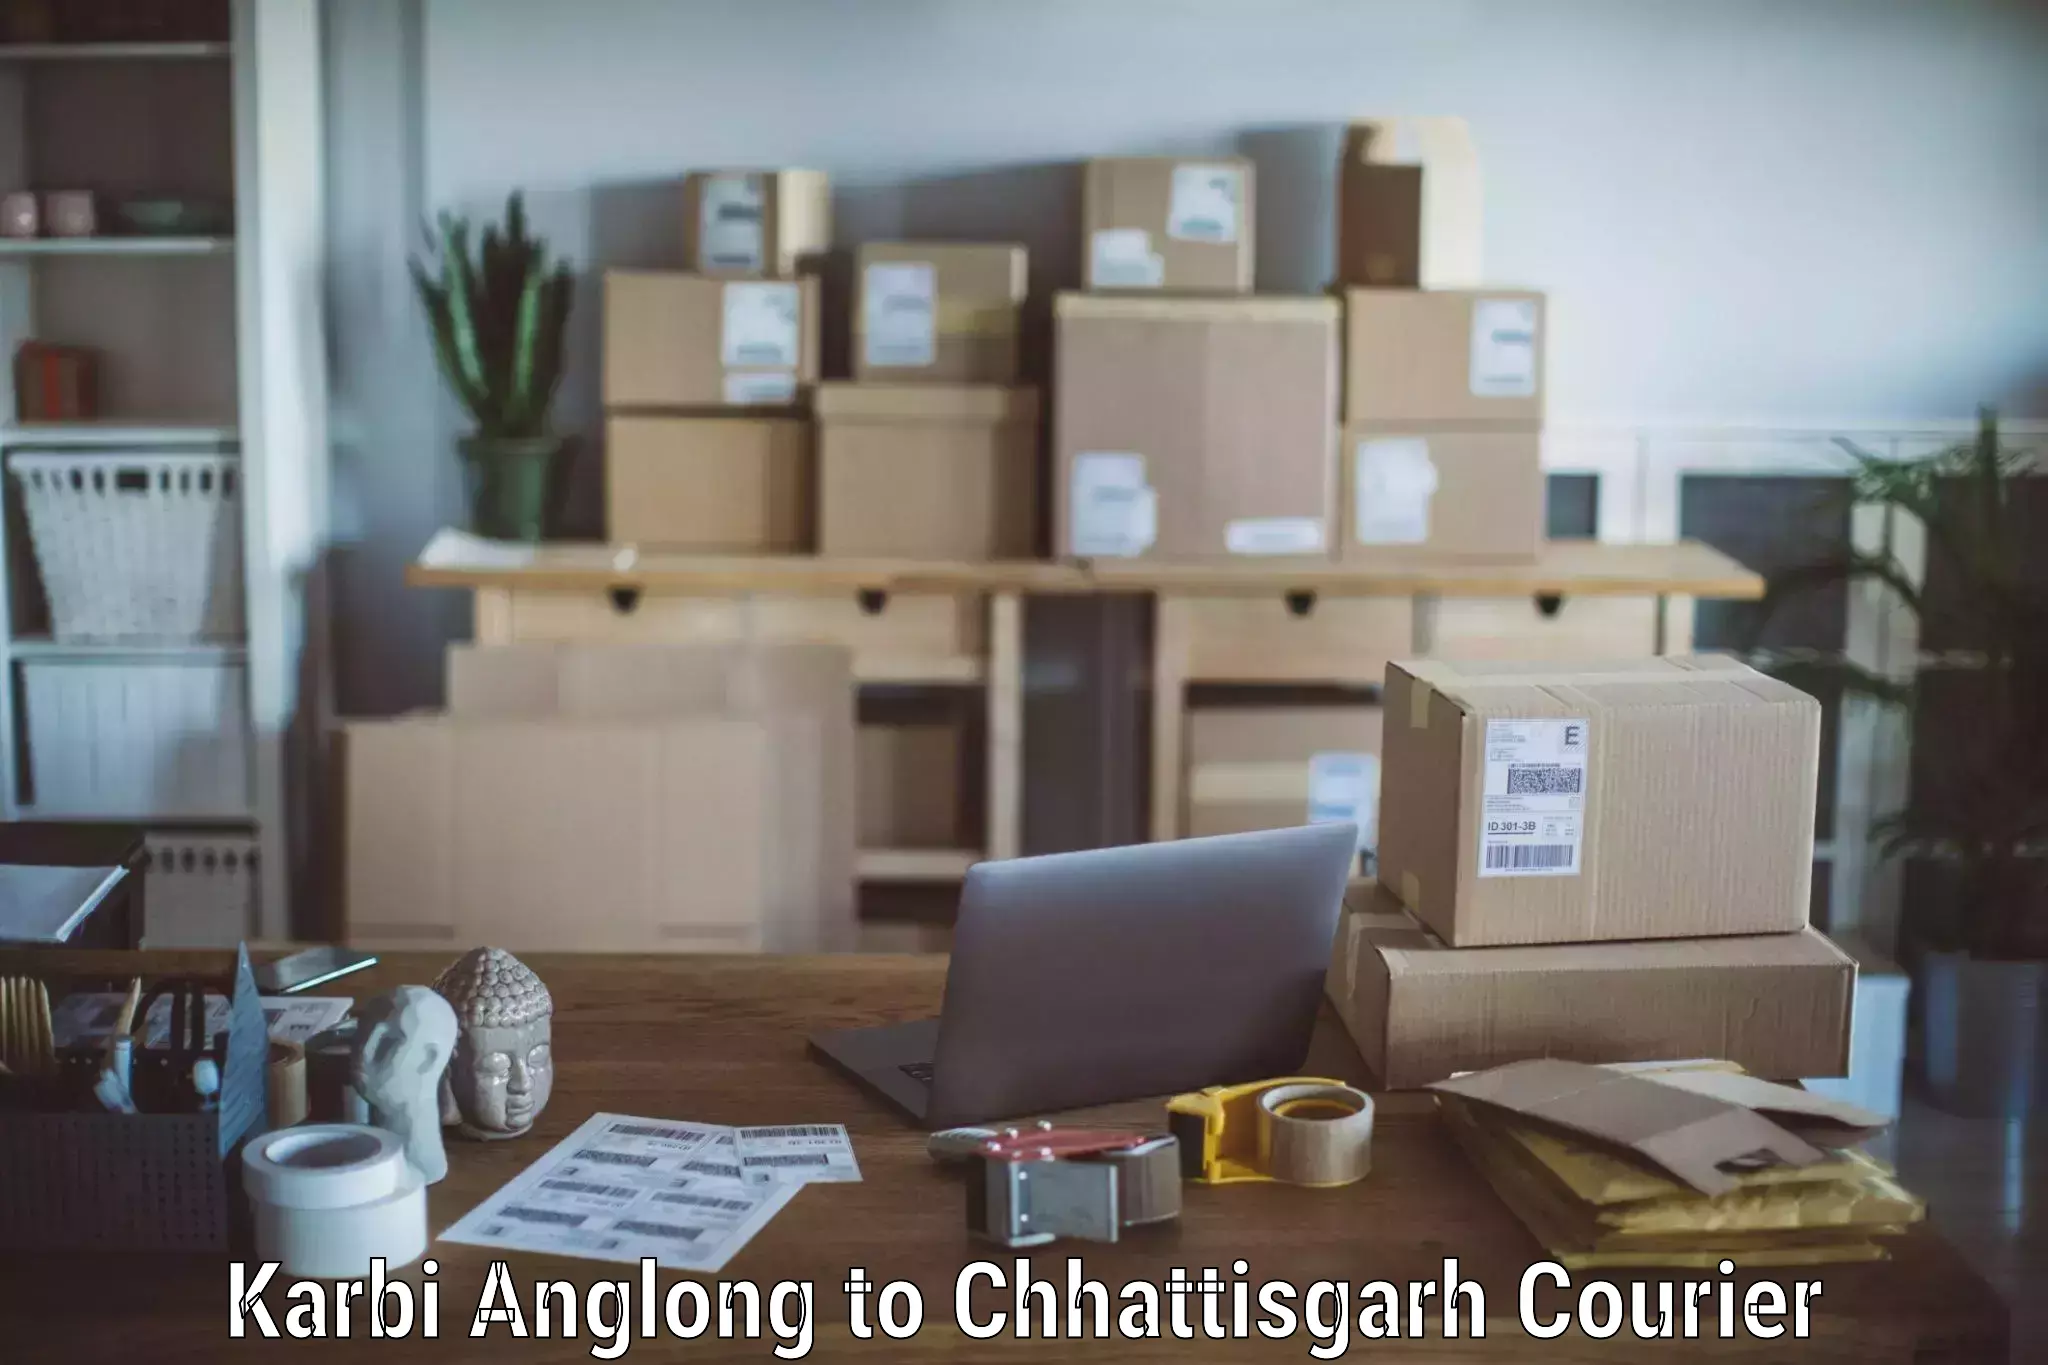 Reliable relocation services Karbi Anglong to Raigarh